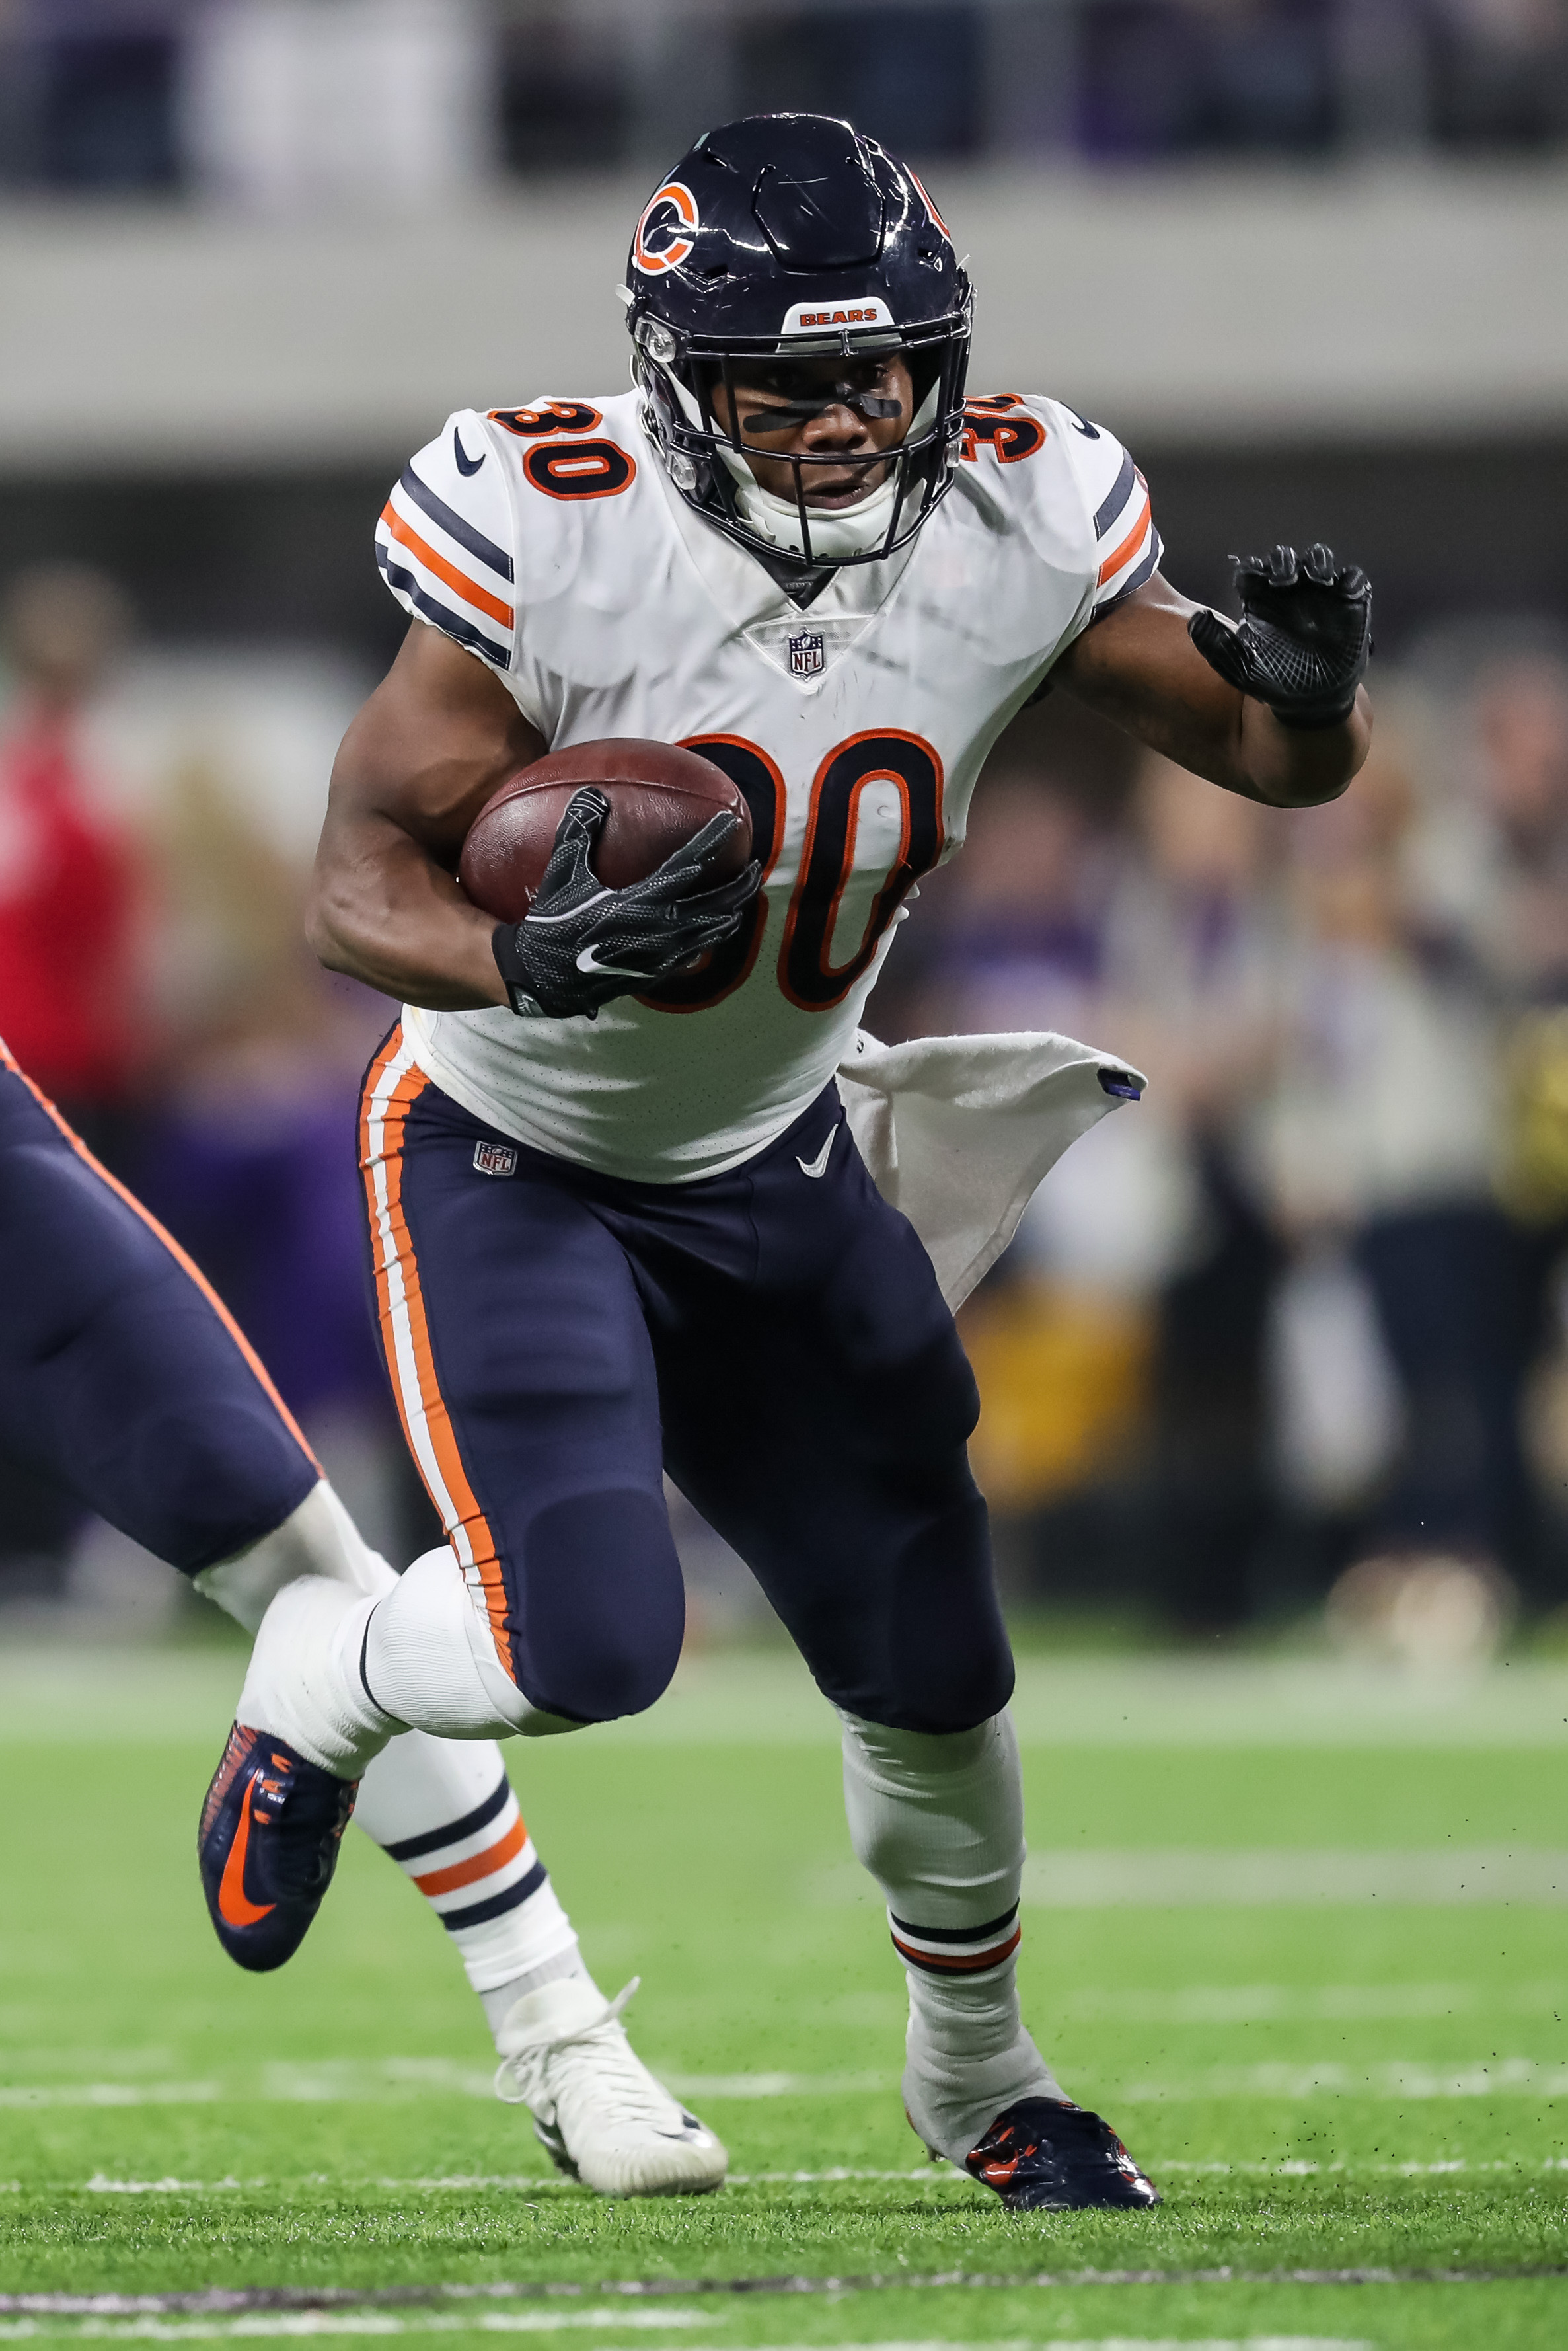 Chicago Bears RB Benny Cunningham carries the ball against the Minnesota Vikings, Dec. 30, 2018.